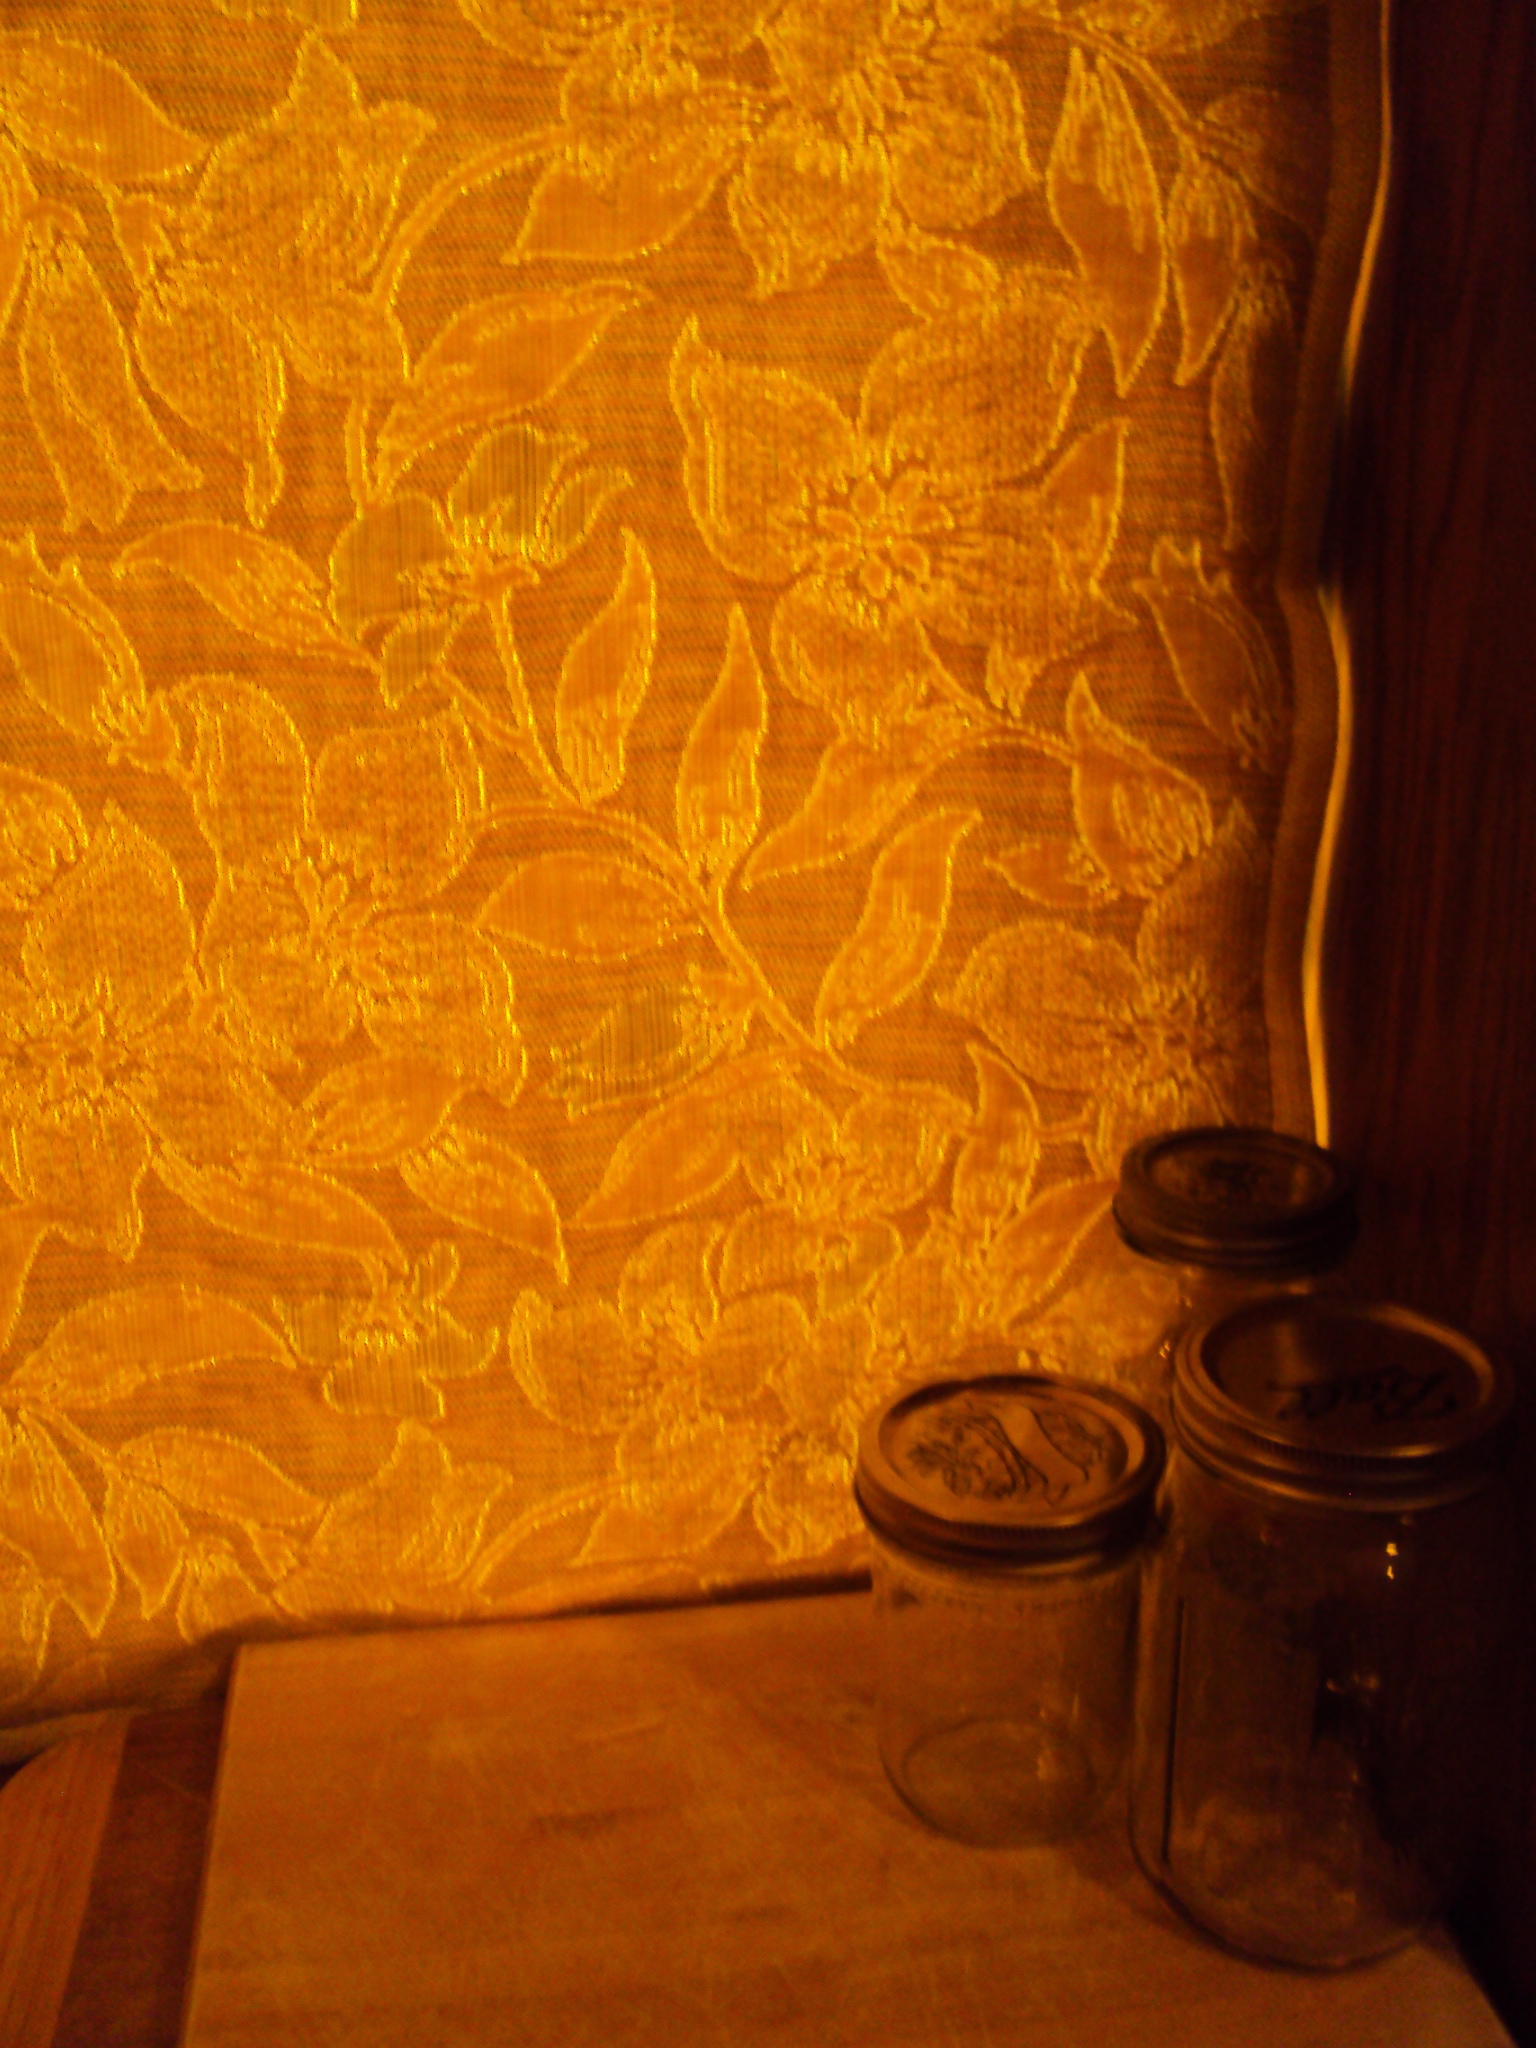 …which, coincidentally, looks an awful lot like the yellow wallpaper that 